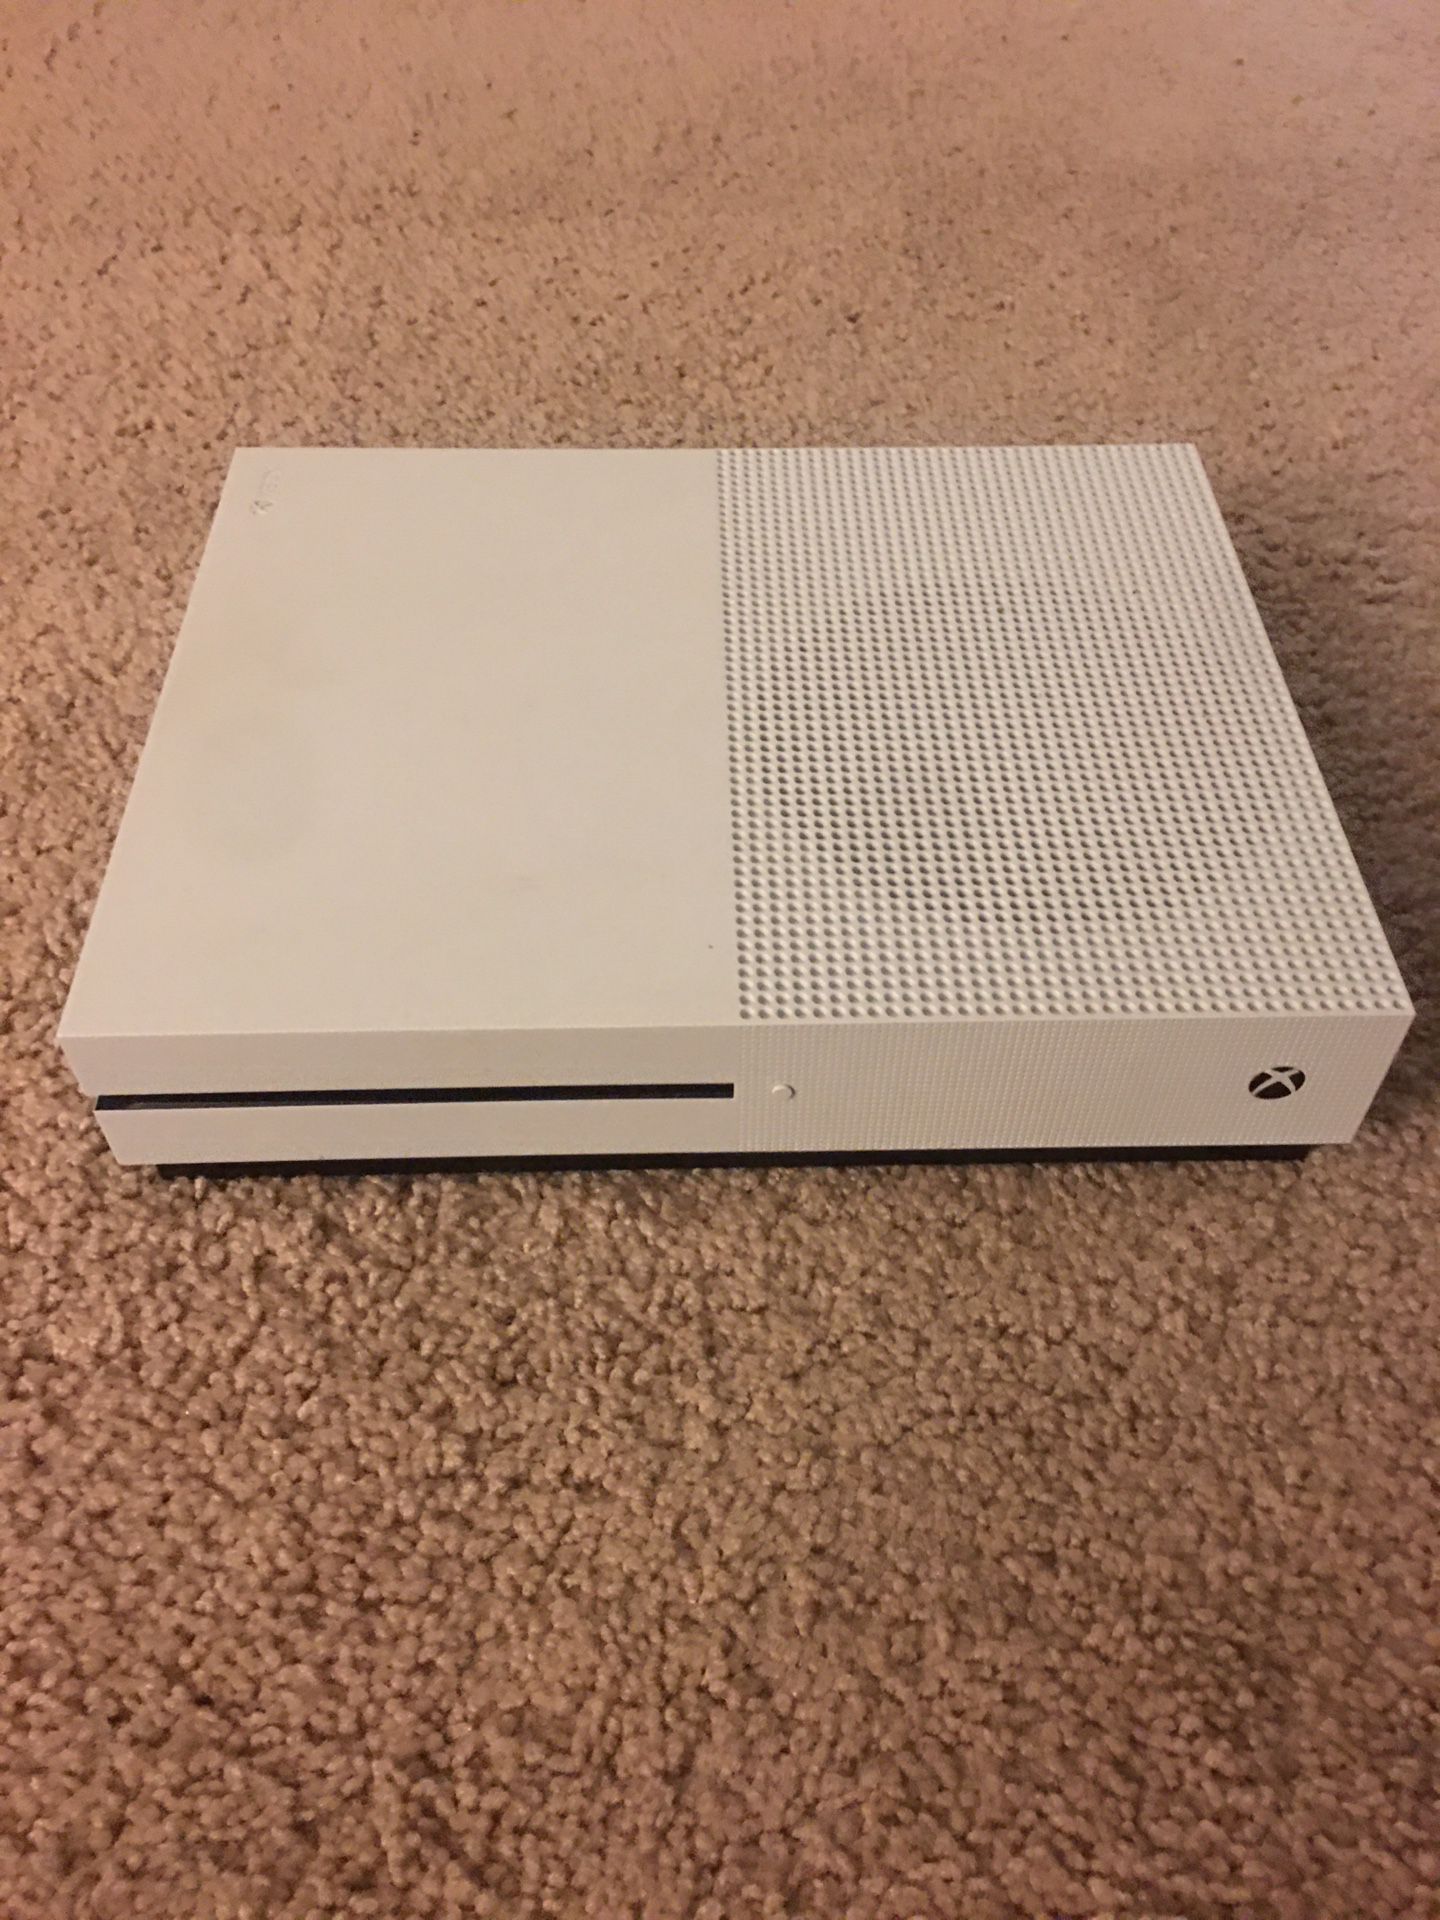 Xbox One S and 20 Games